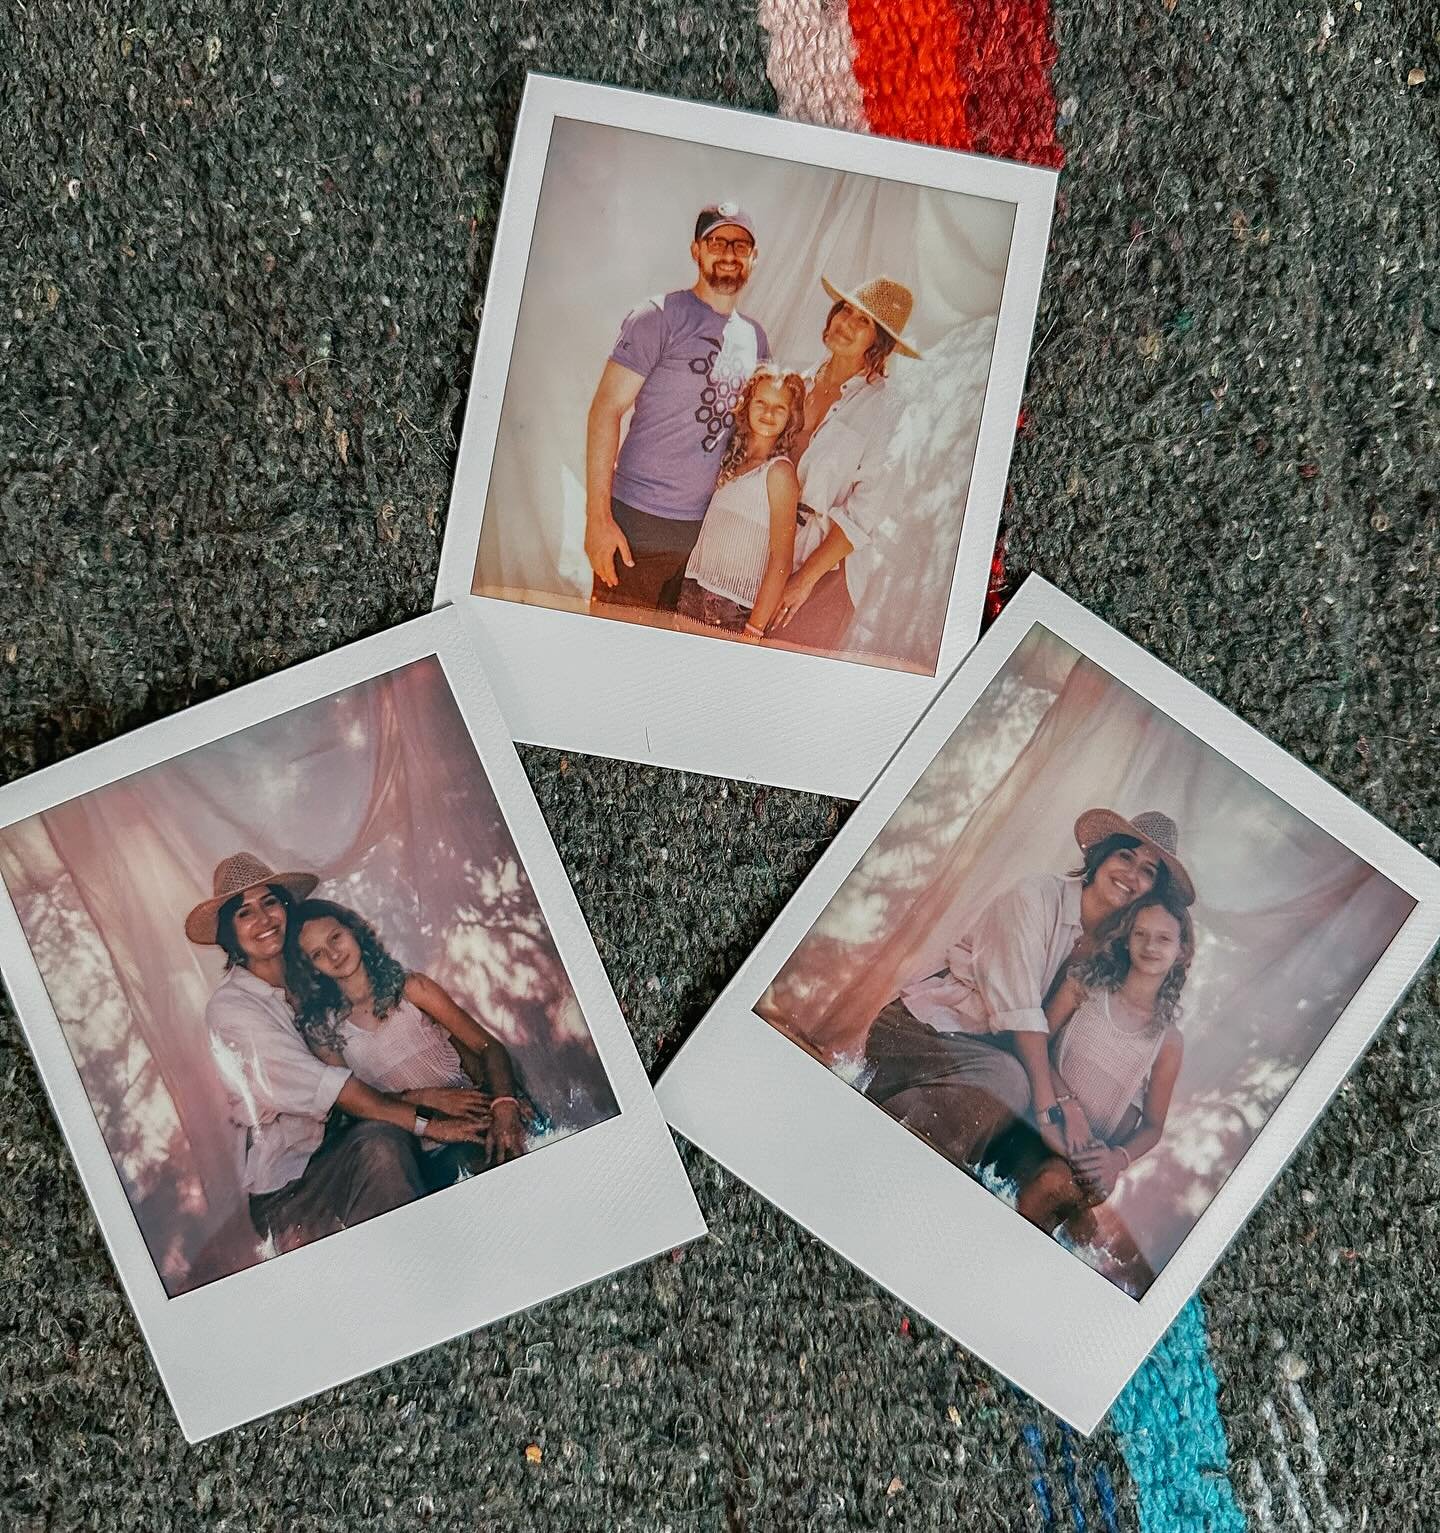 Family ❤️ in love with these impromptu Polaroids we got from the lovely @unhurried_wonderful and now I need to figure out how to properly display them!!